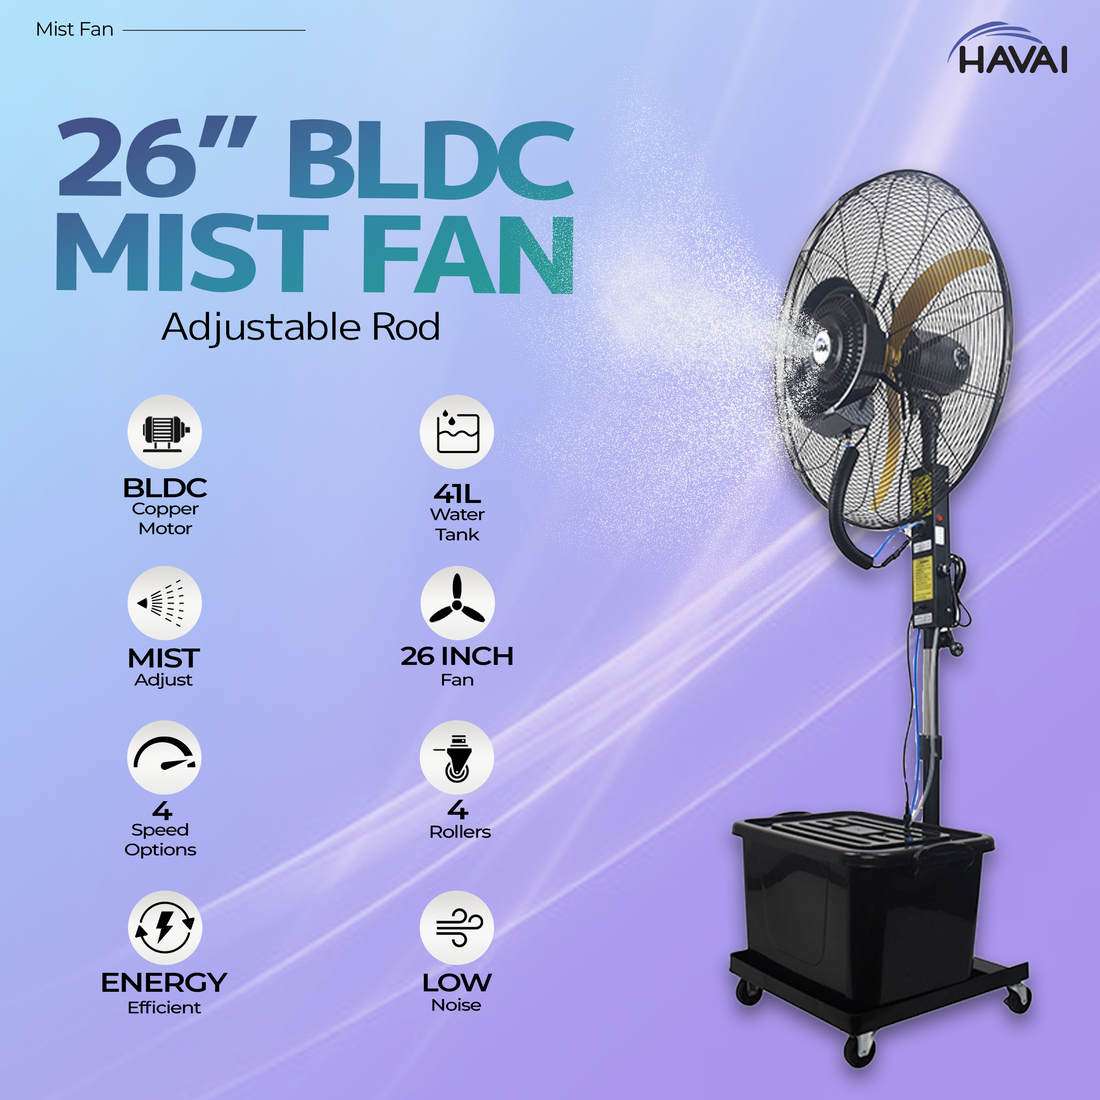 HAVAI BLDC Mist Fan 26 inch with Adjustable Rod, 41 Litre Tank, Assembly Included